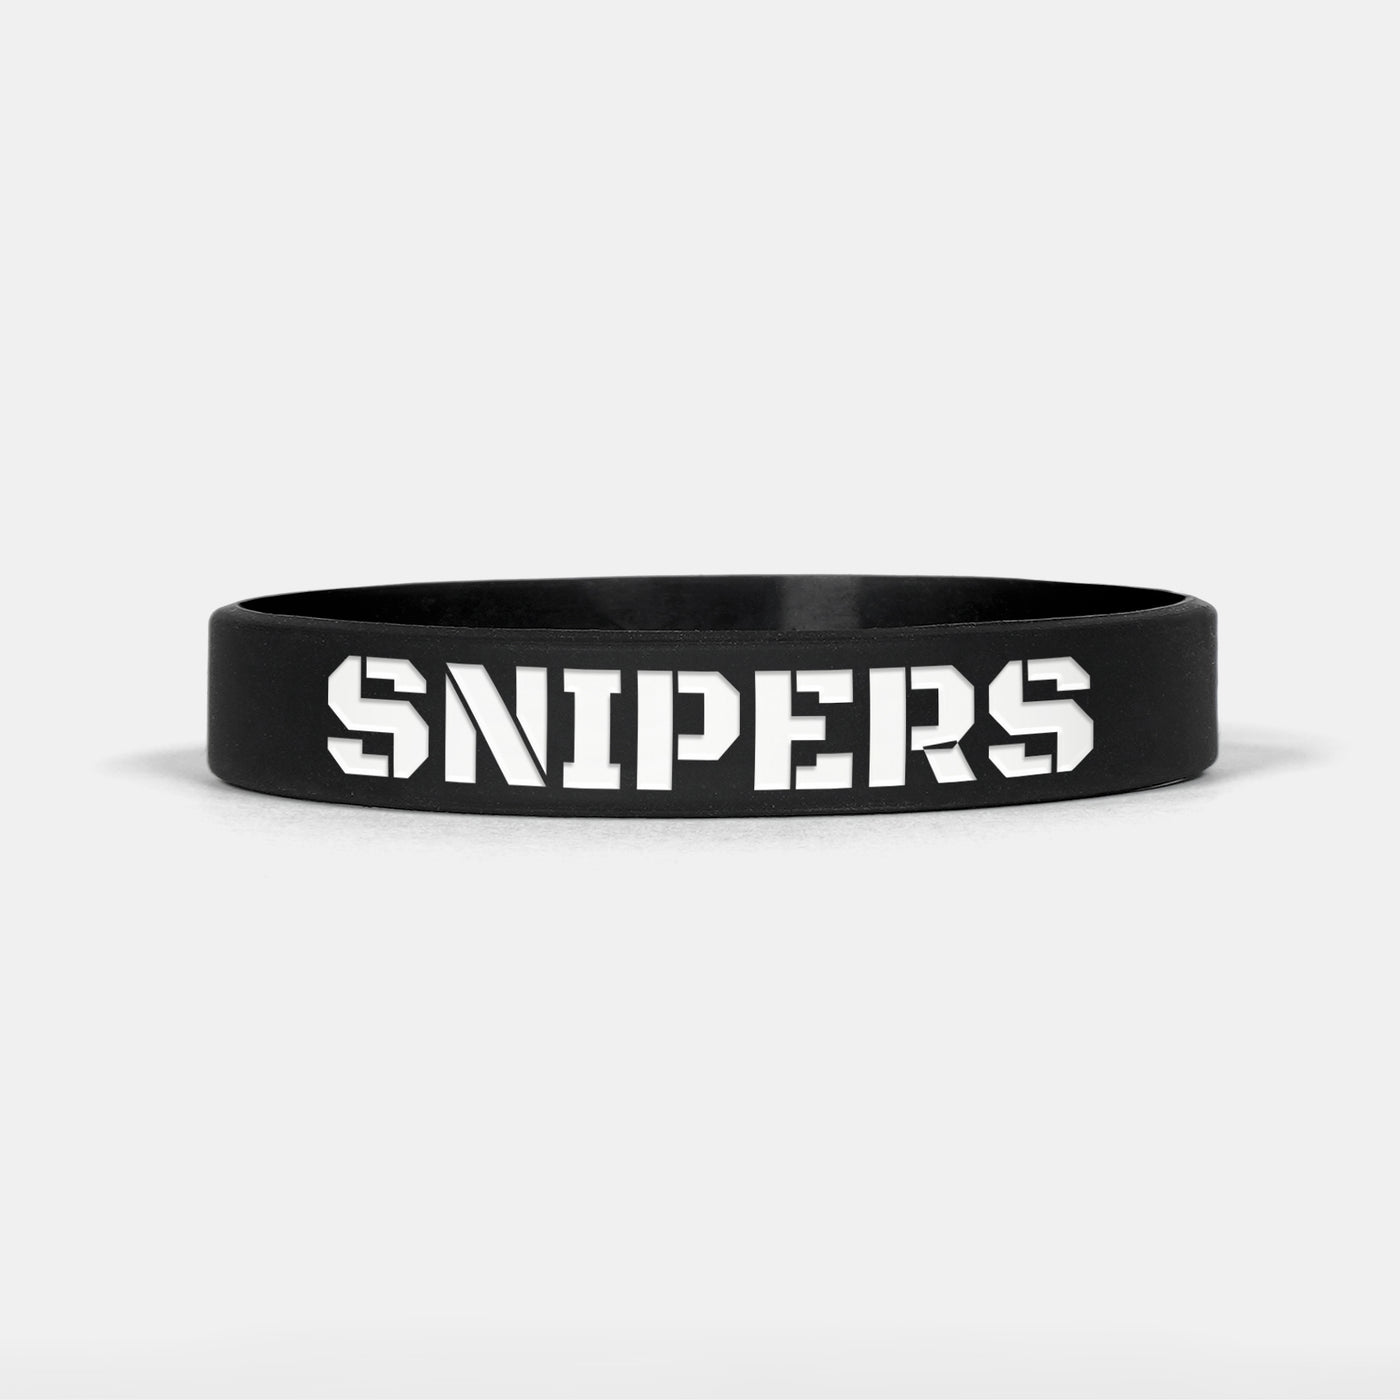 Snipers Motivational Wristband